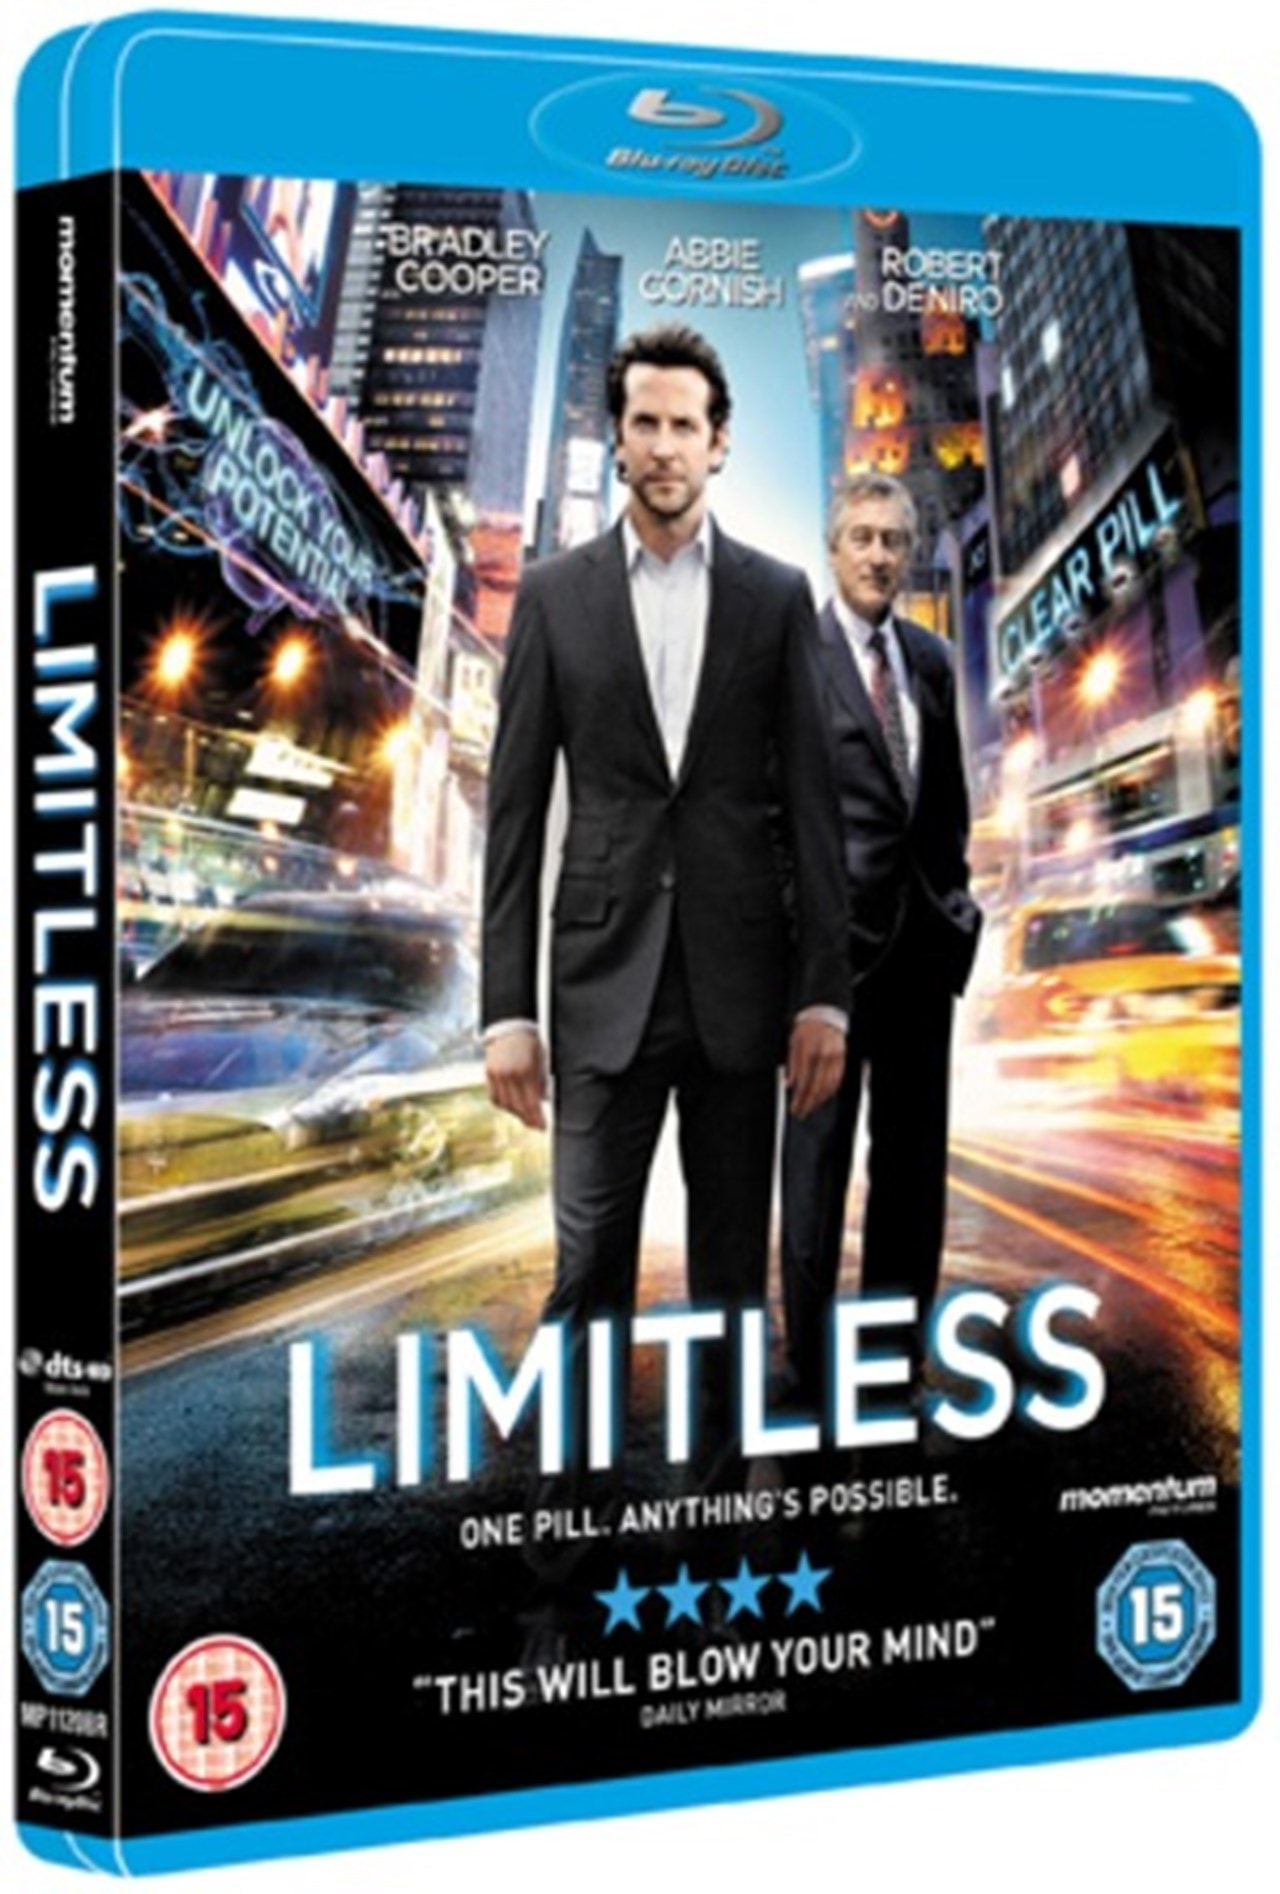 limitless 2011 direct download free